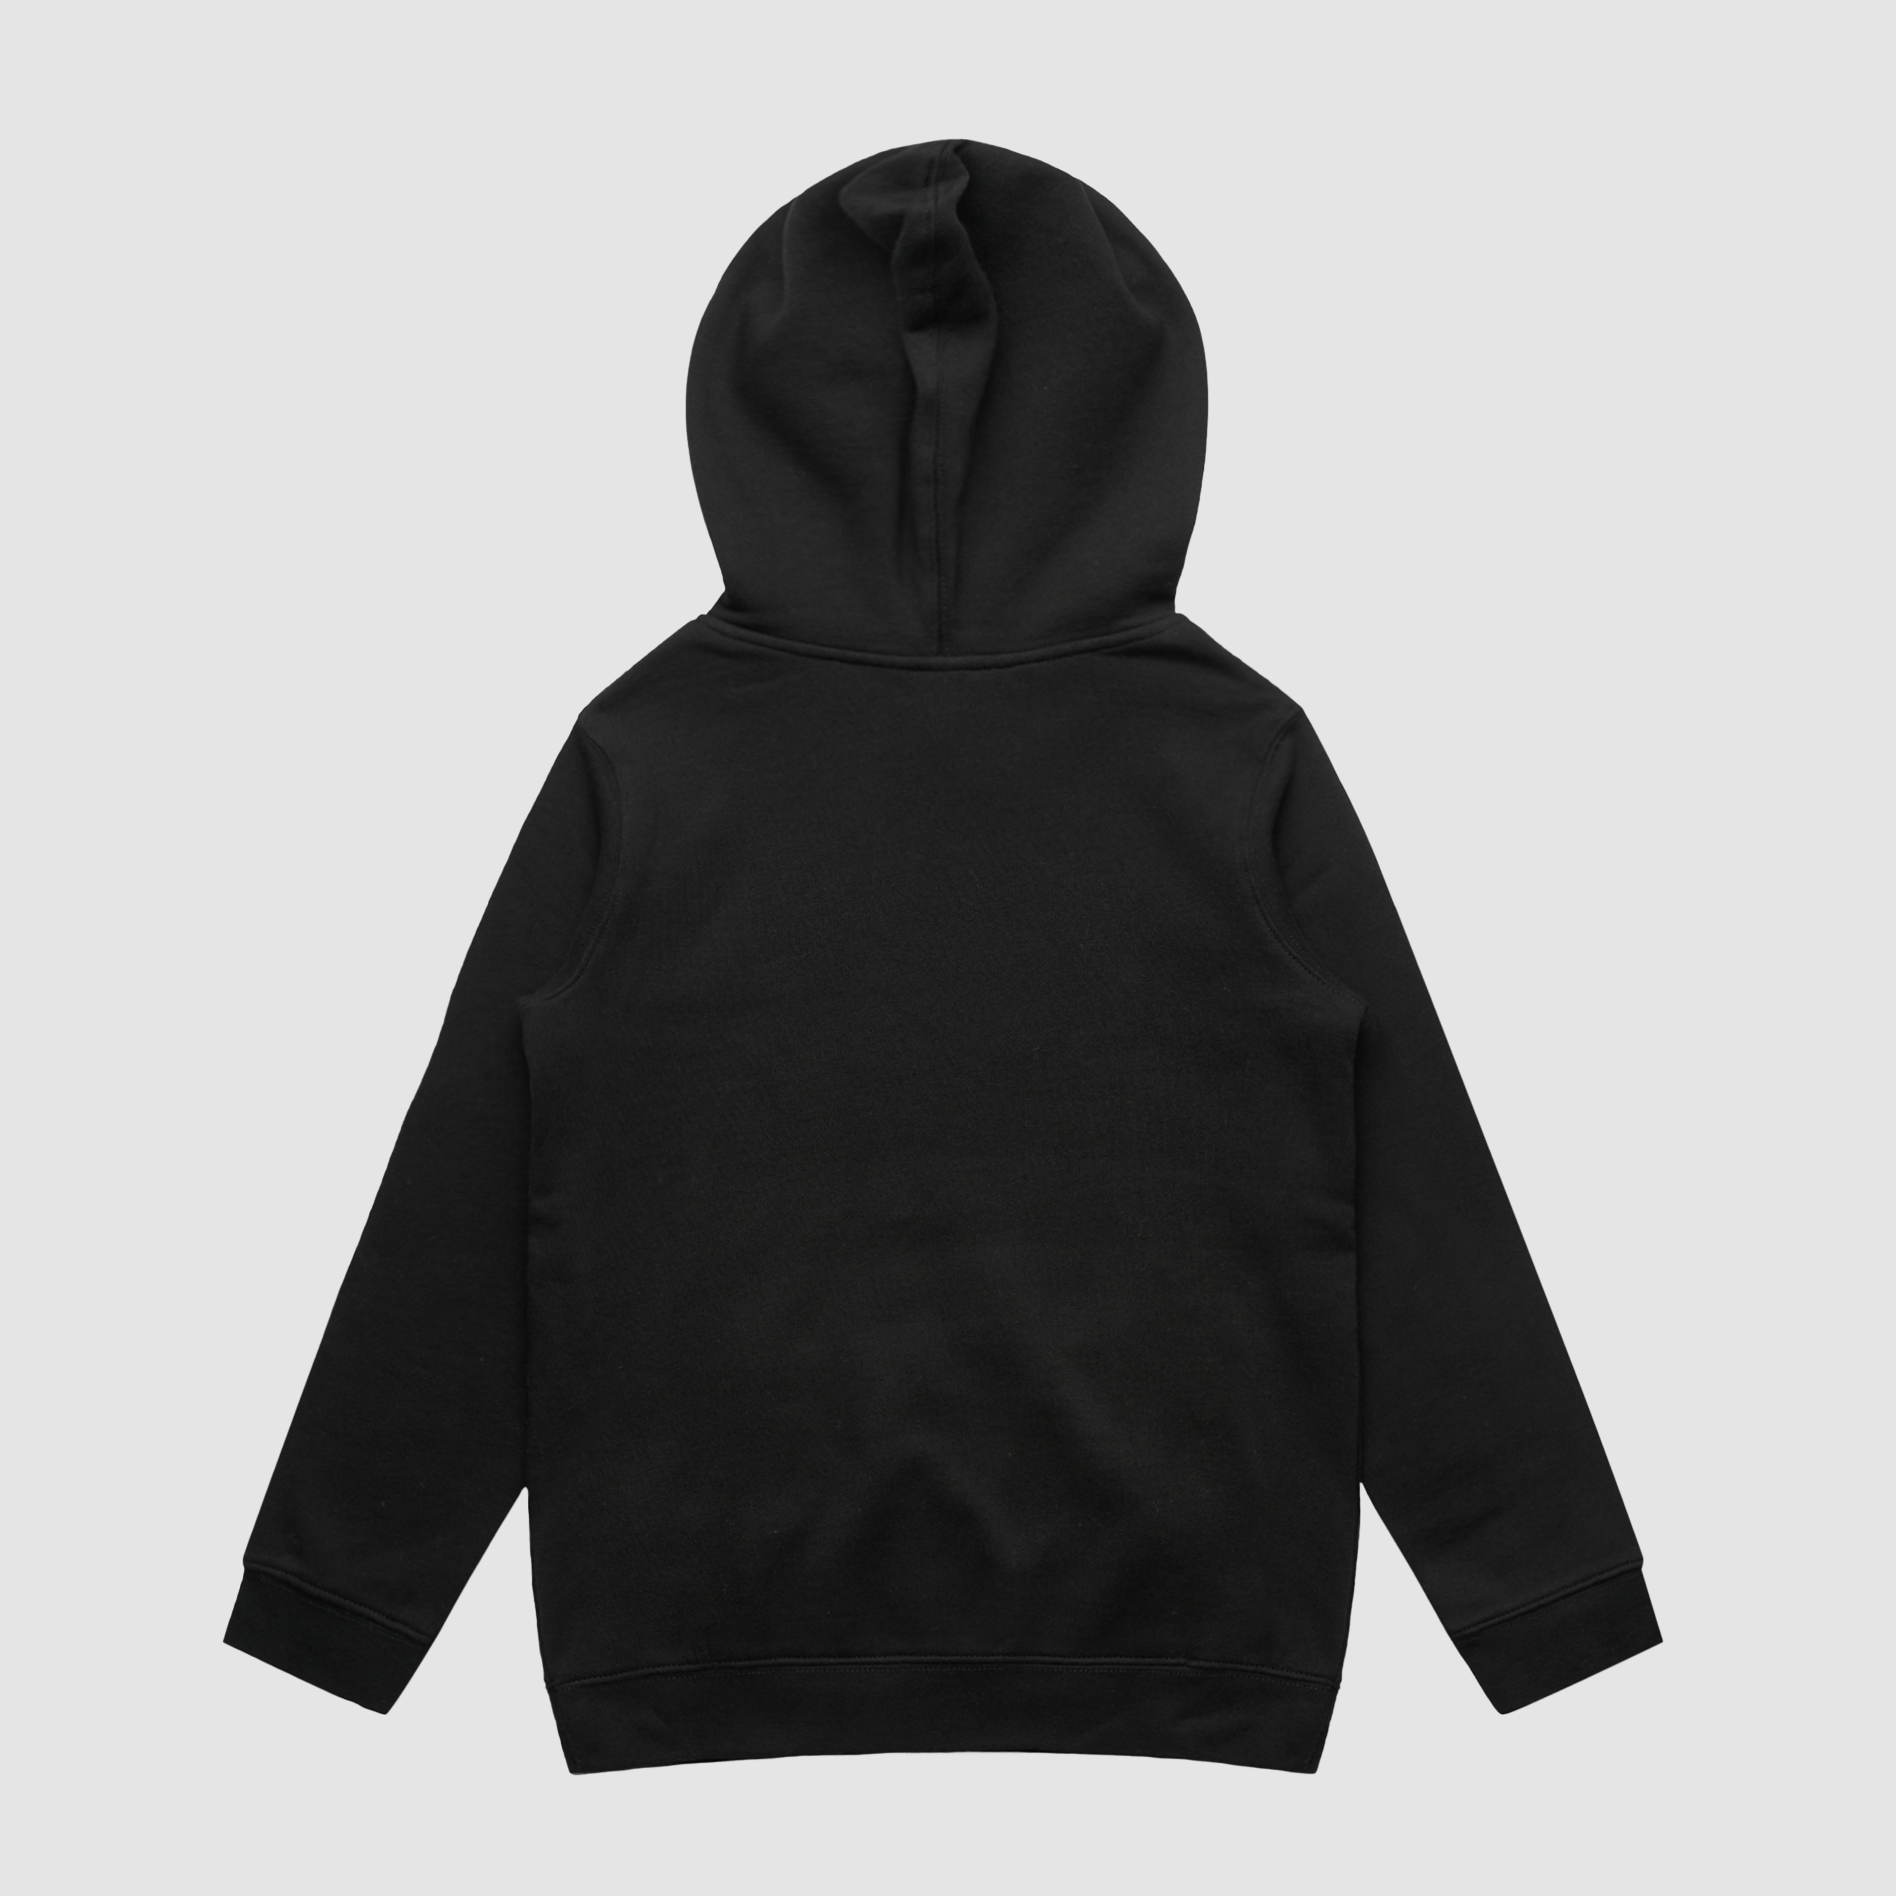 KCSC Youth Supply Hoodie